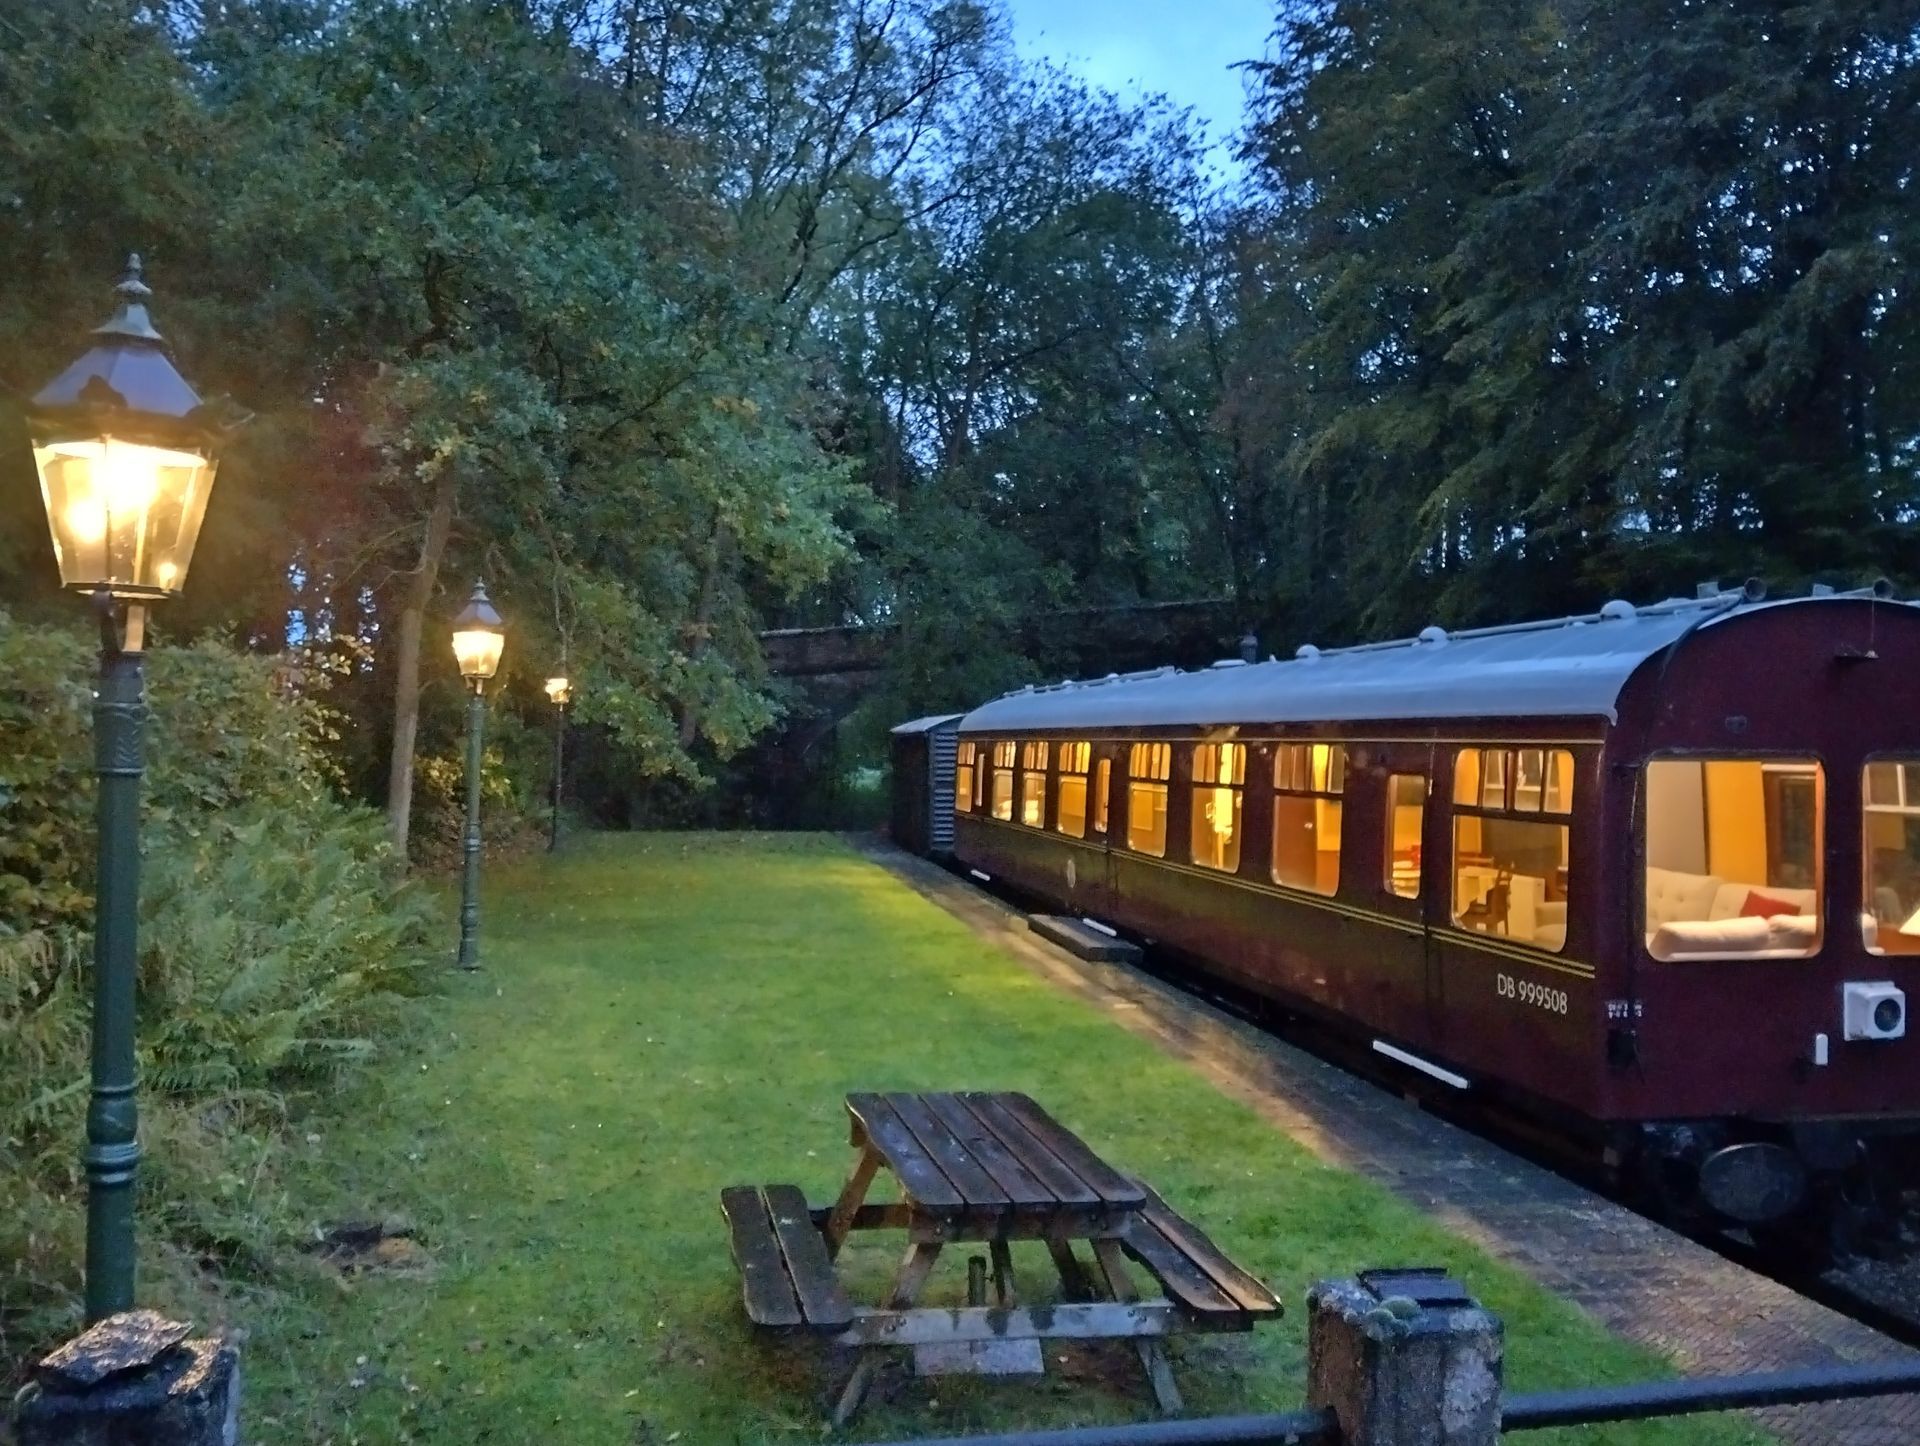 The green 'Platform 2' at Rowden Mill Station houses the Saloon Coach DB999508 - our 1960's railway carriage that sleeps 4 guests